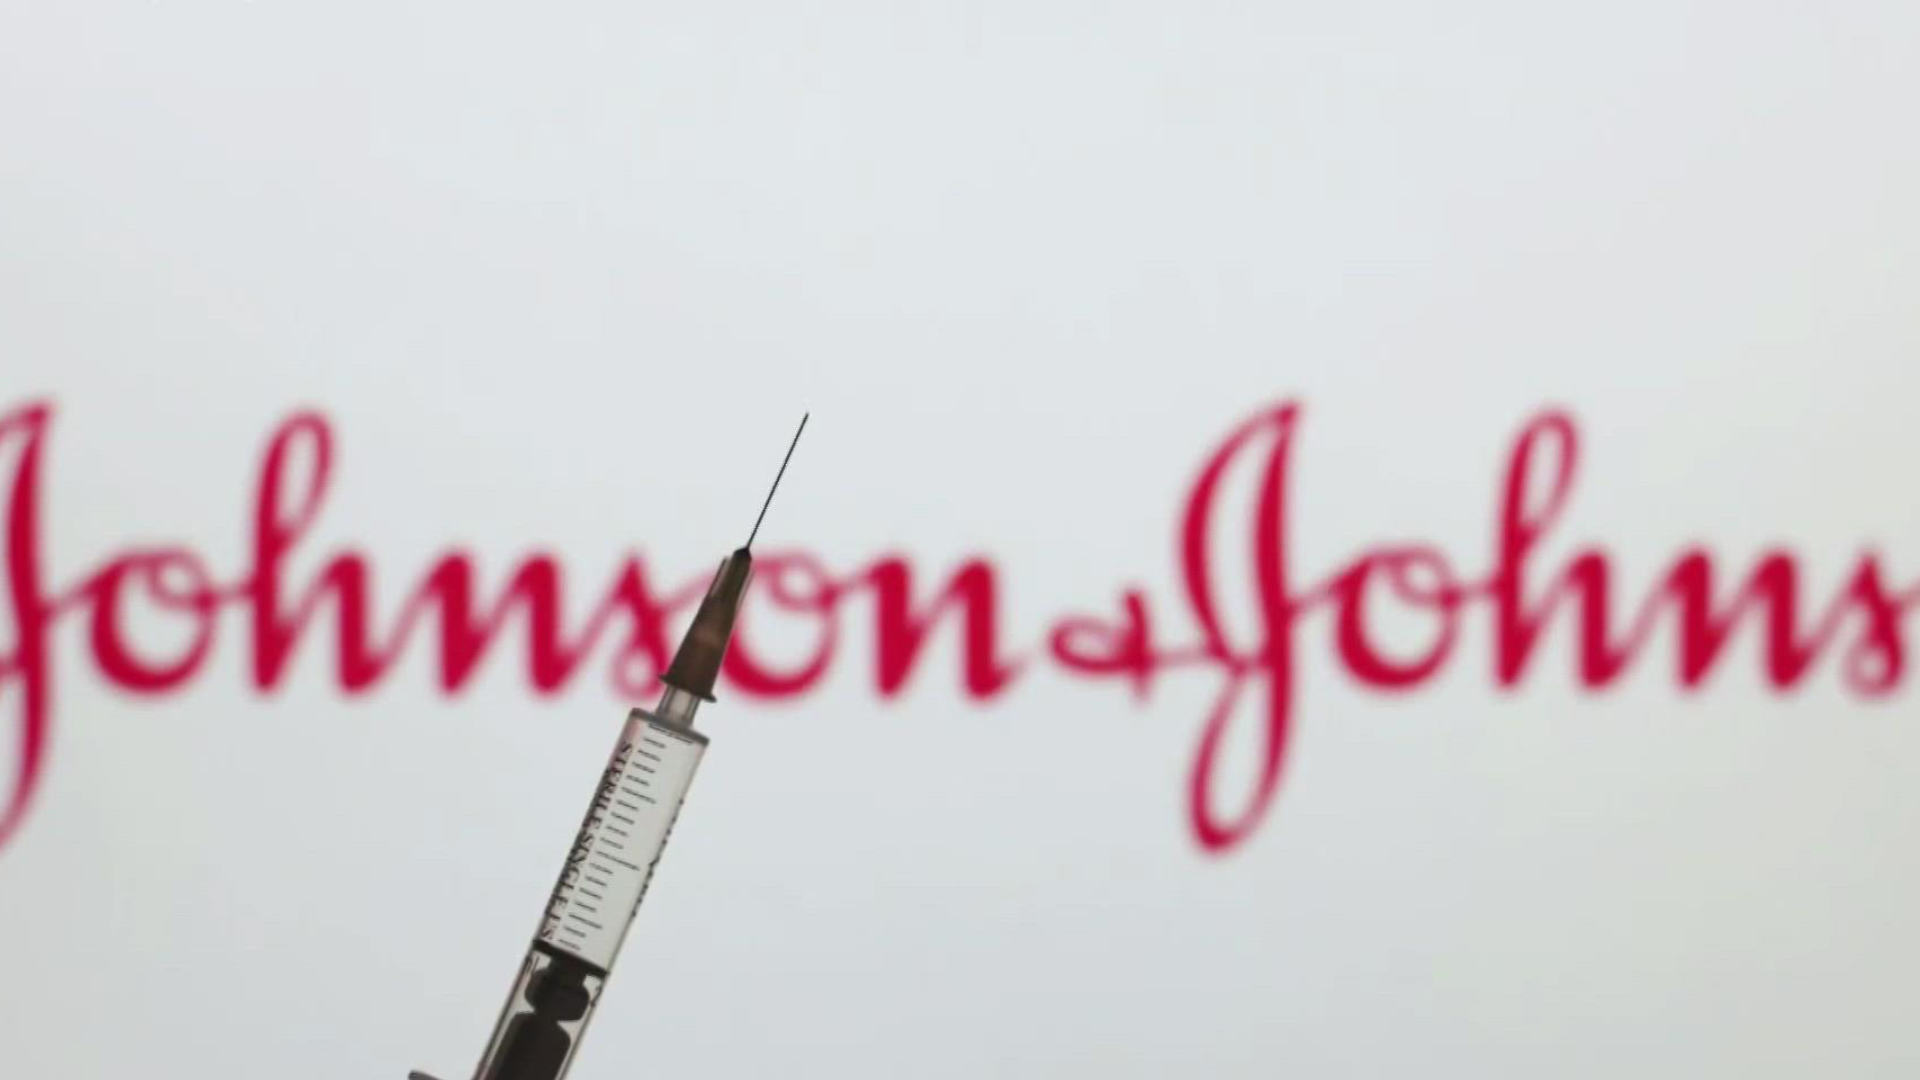 J&J released new data stating a booster shot could increase antibody response nine fold. But not everyone is buying in.